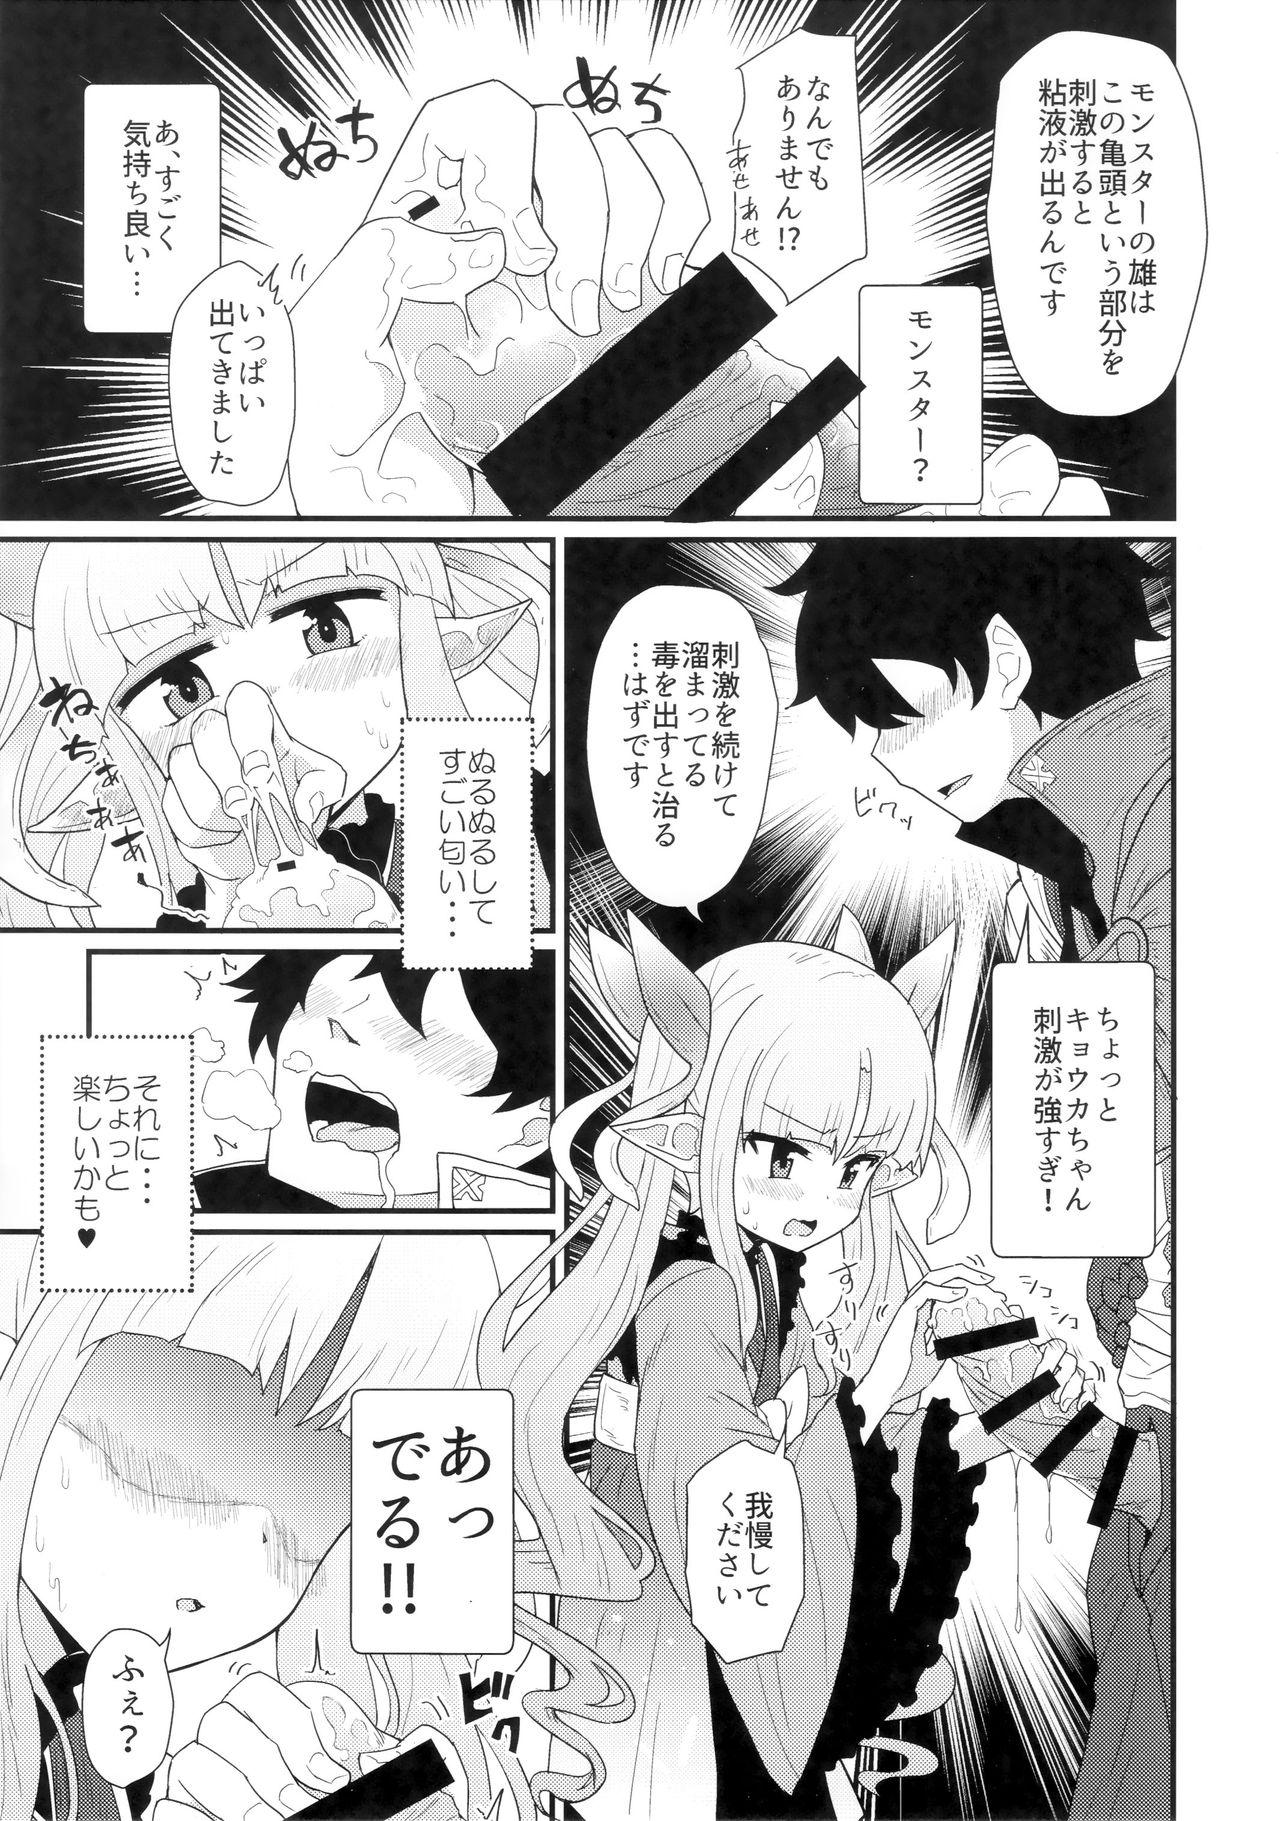 3some Onegai Kyouka-chan - Princess connect Affair - Page 4